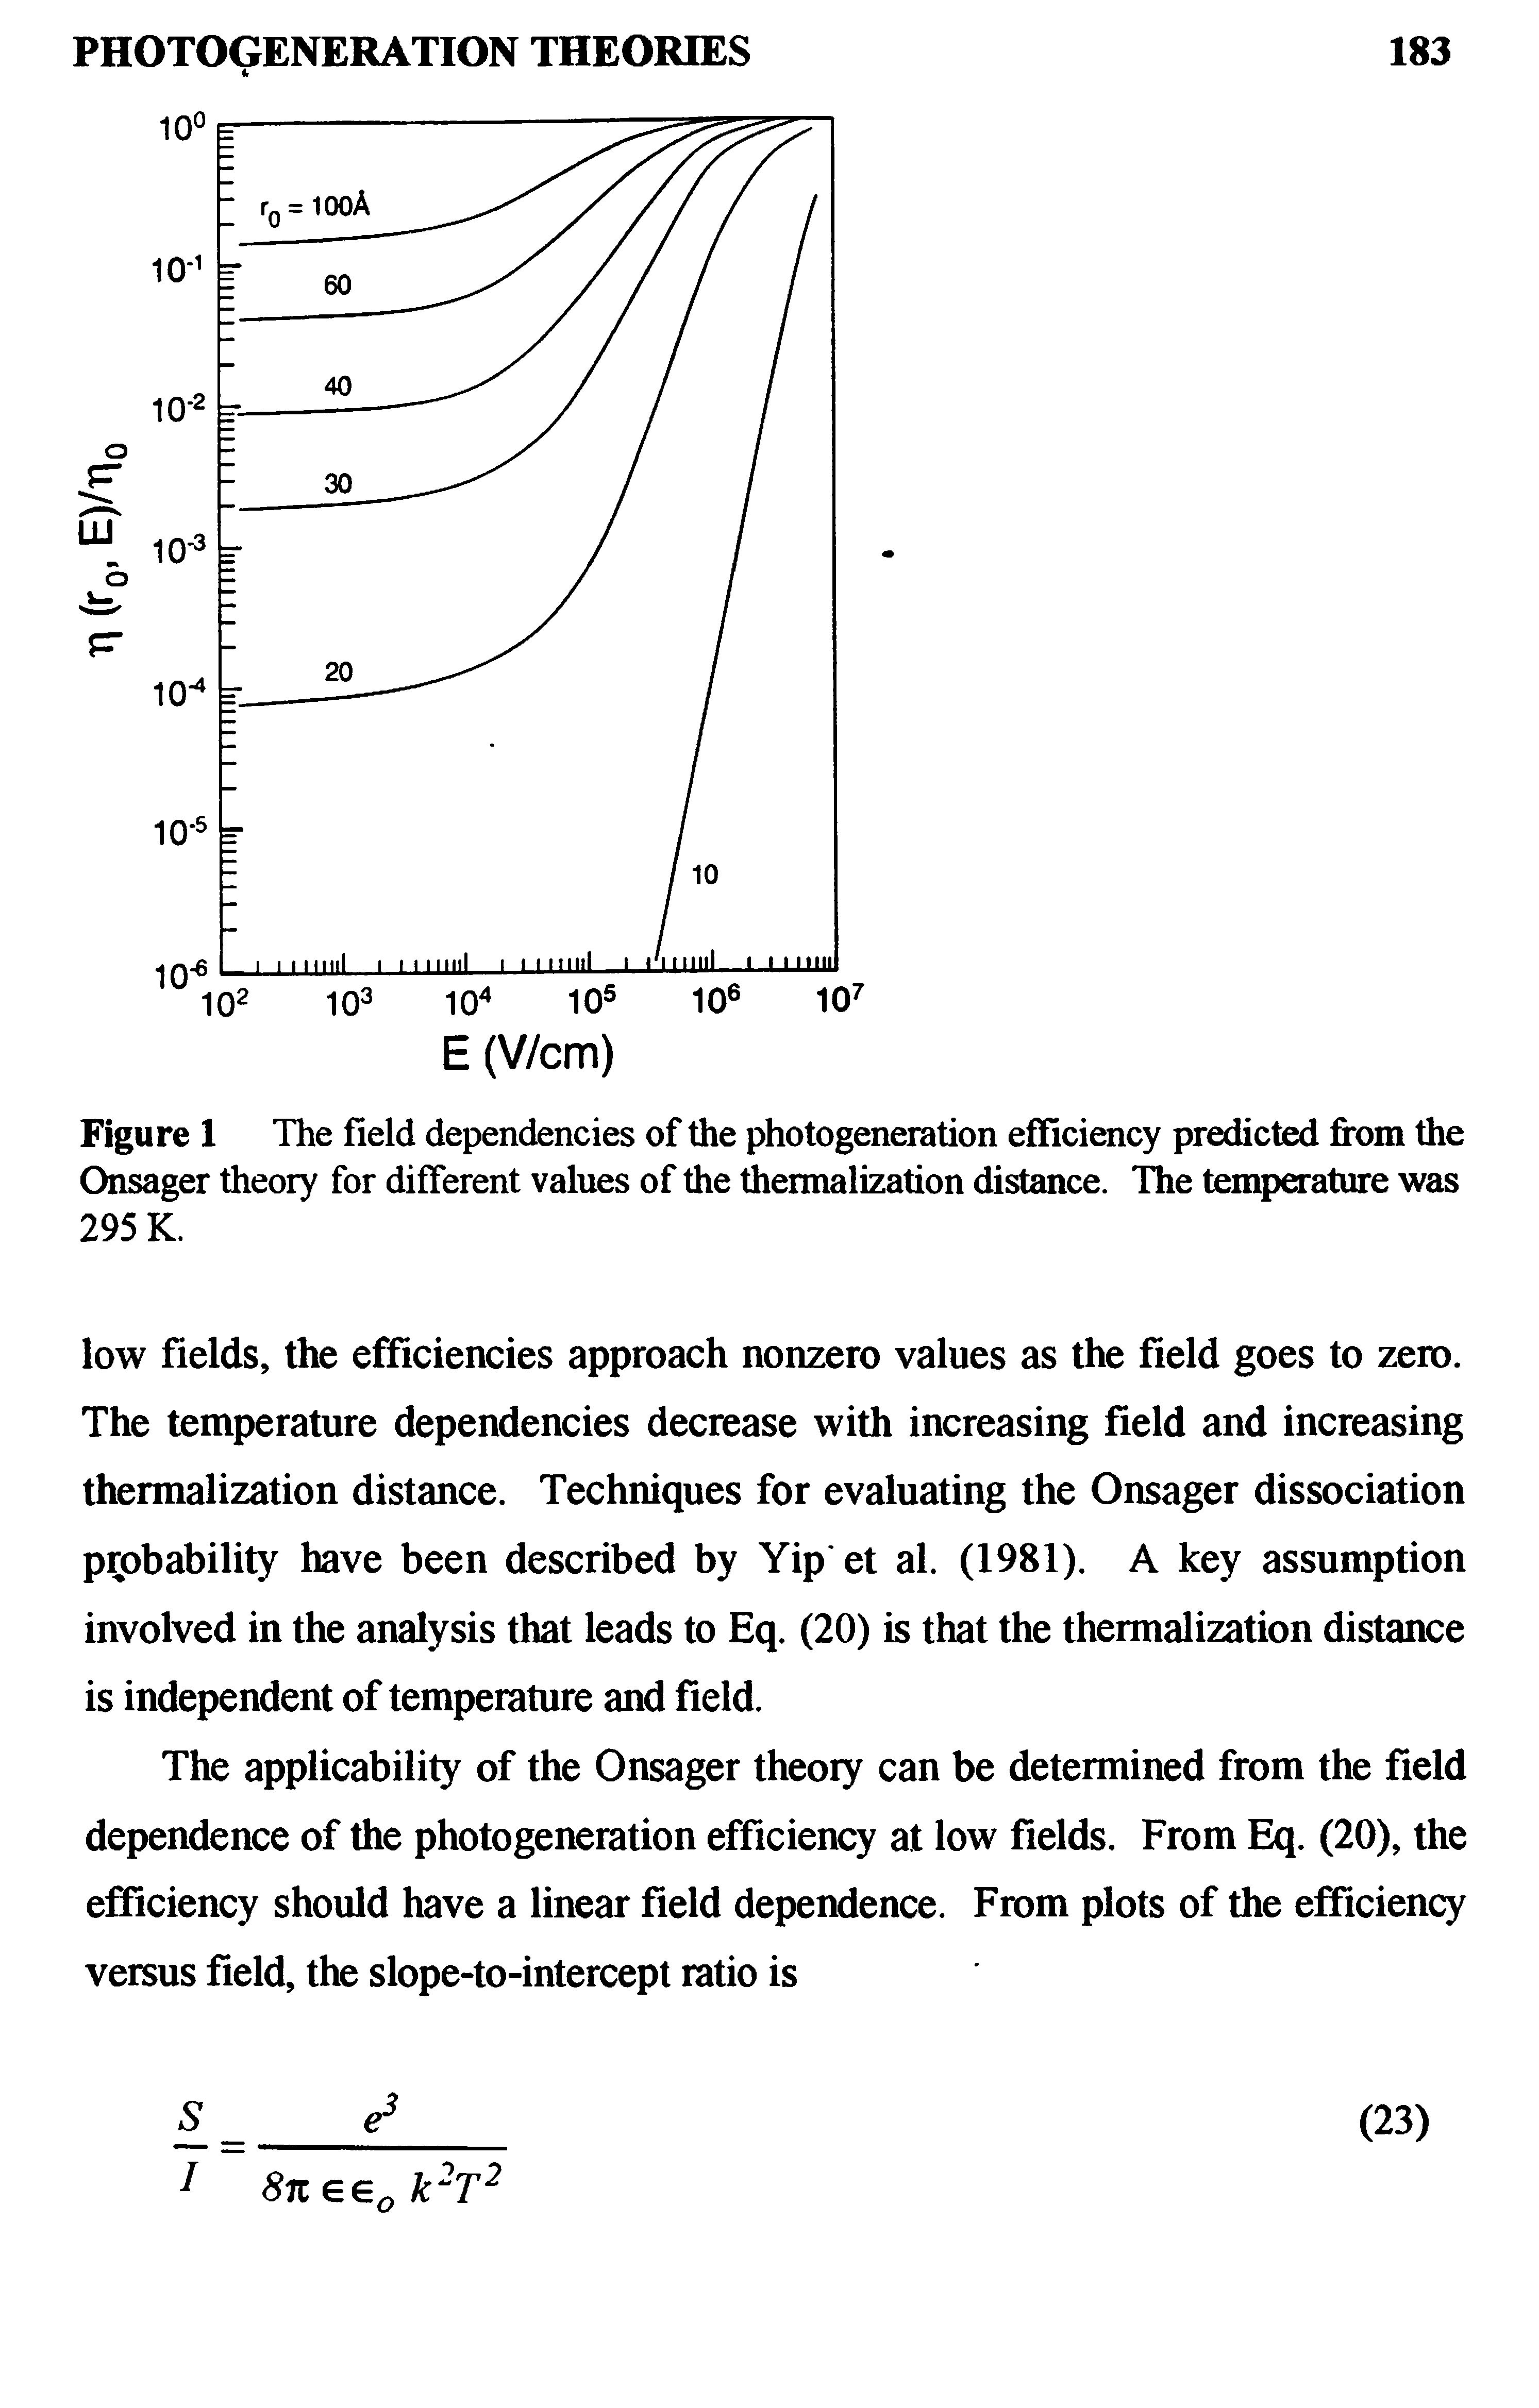 Figure 1 The field dependencies of the photogeneration efficiency predicted from the Onsager theory for different values of the thermalization distance. The temperature was 295 K.